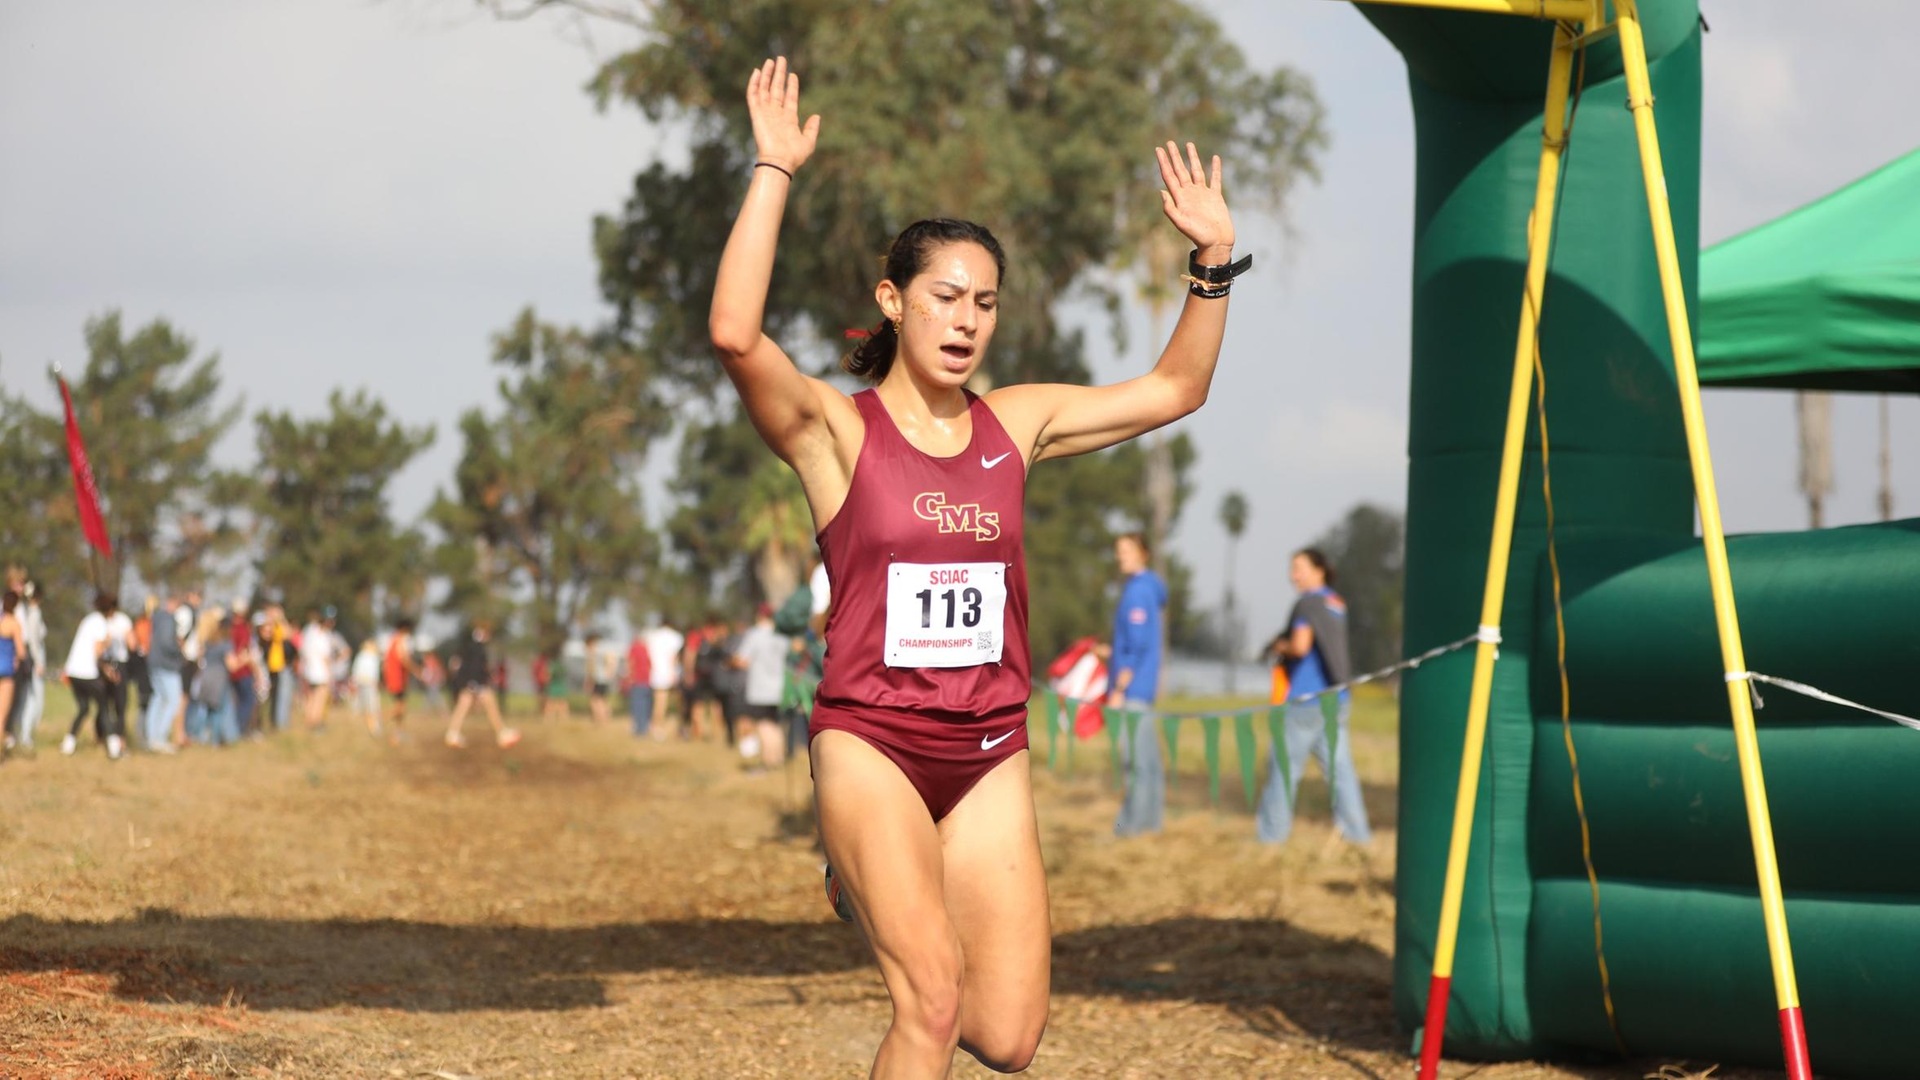 Natalie Bitetti repeated as SCIAC Champion (photo by Aaron Gray)